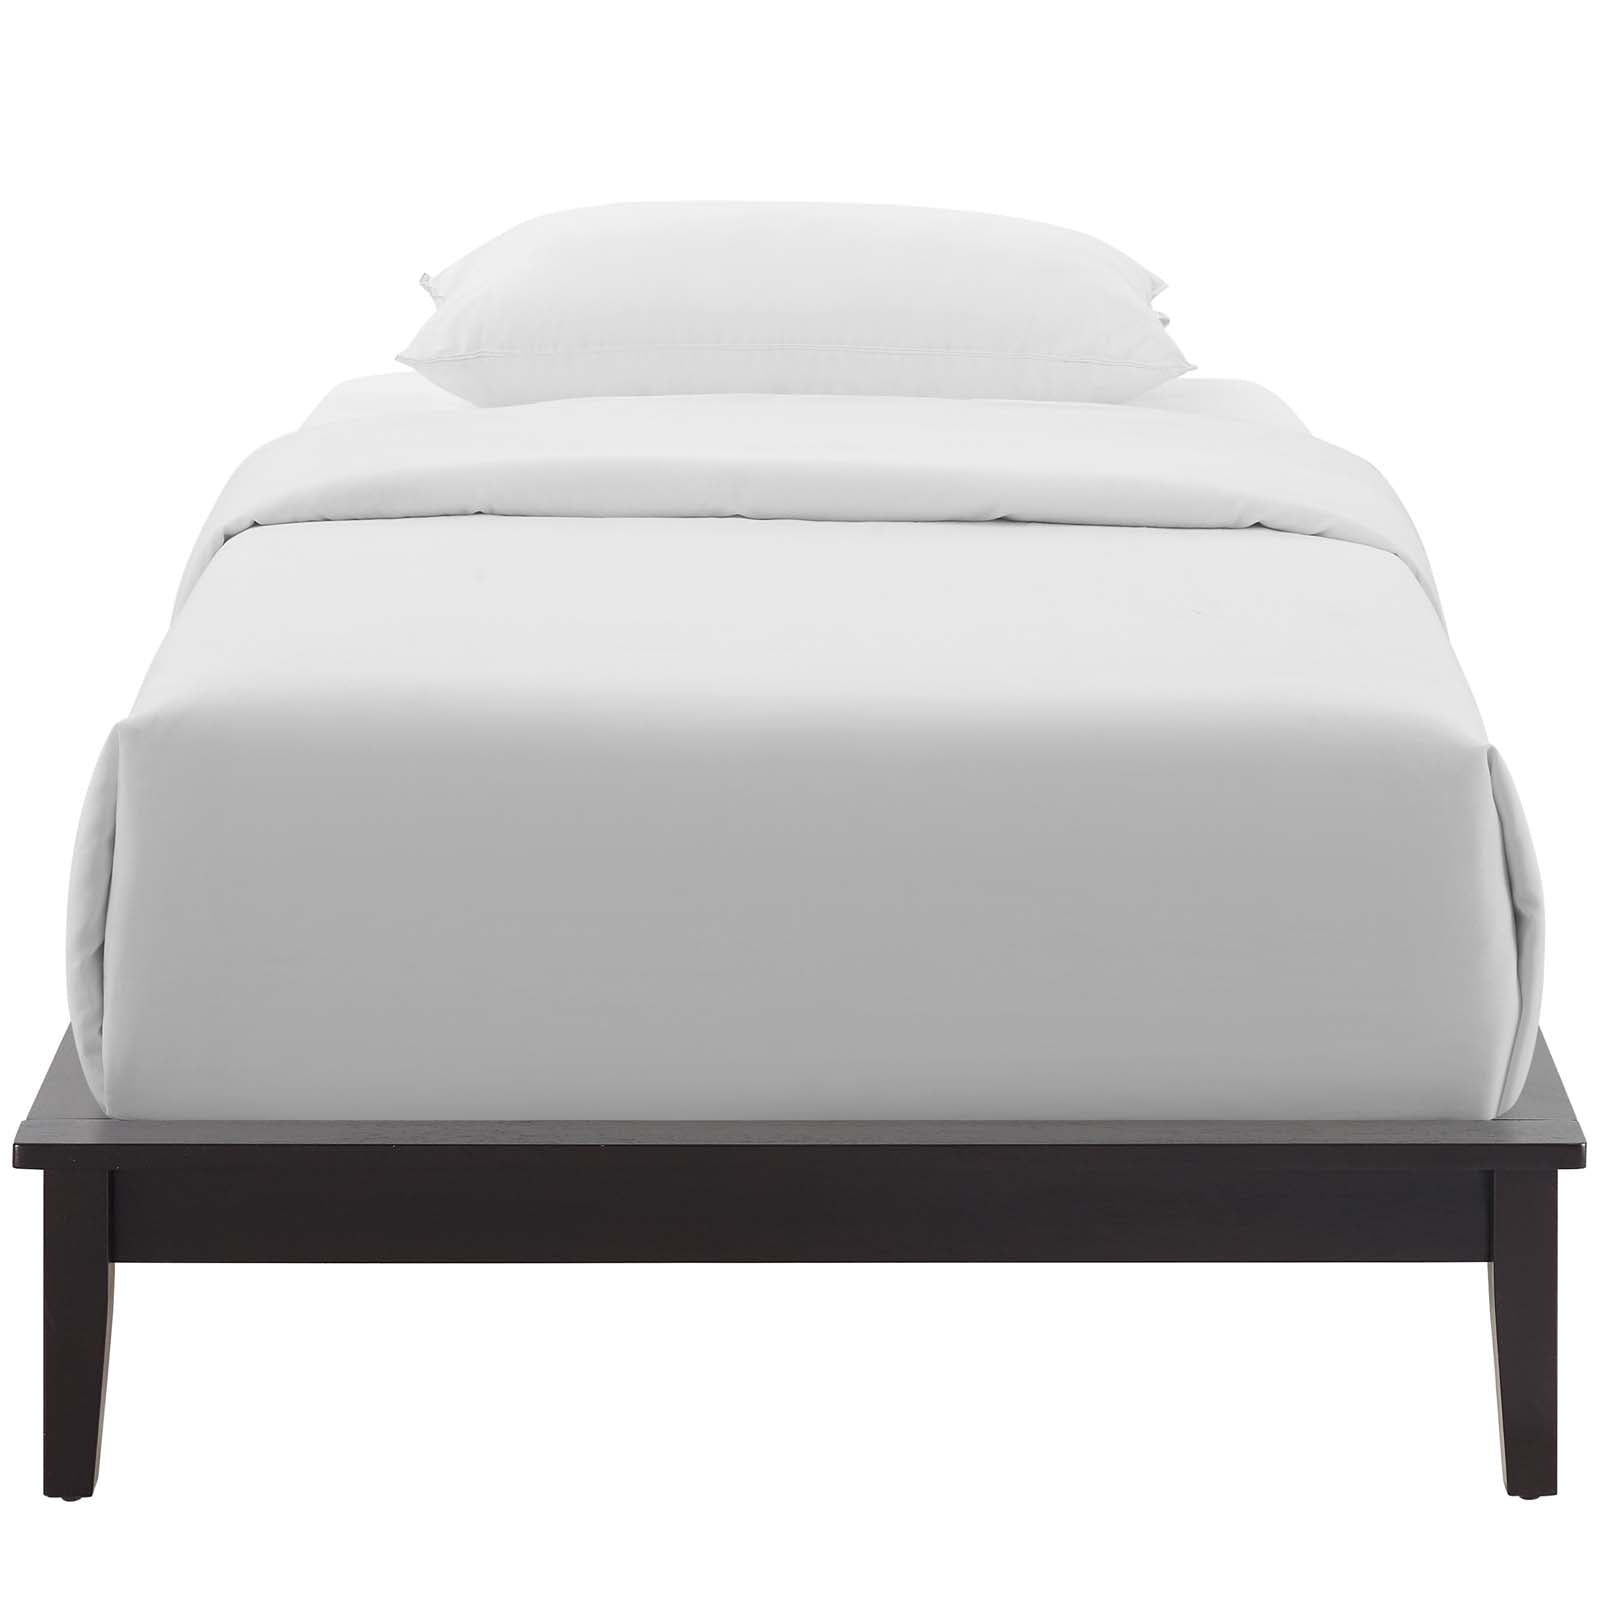 Modway Beds - Lodge Twin Wood Platform Bed Frame Cappuccino